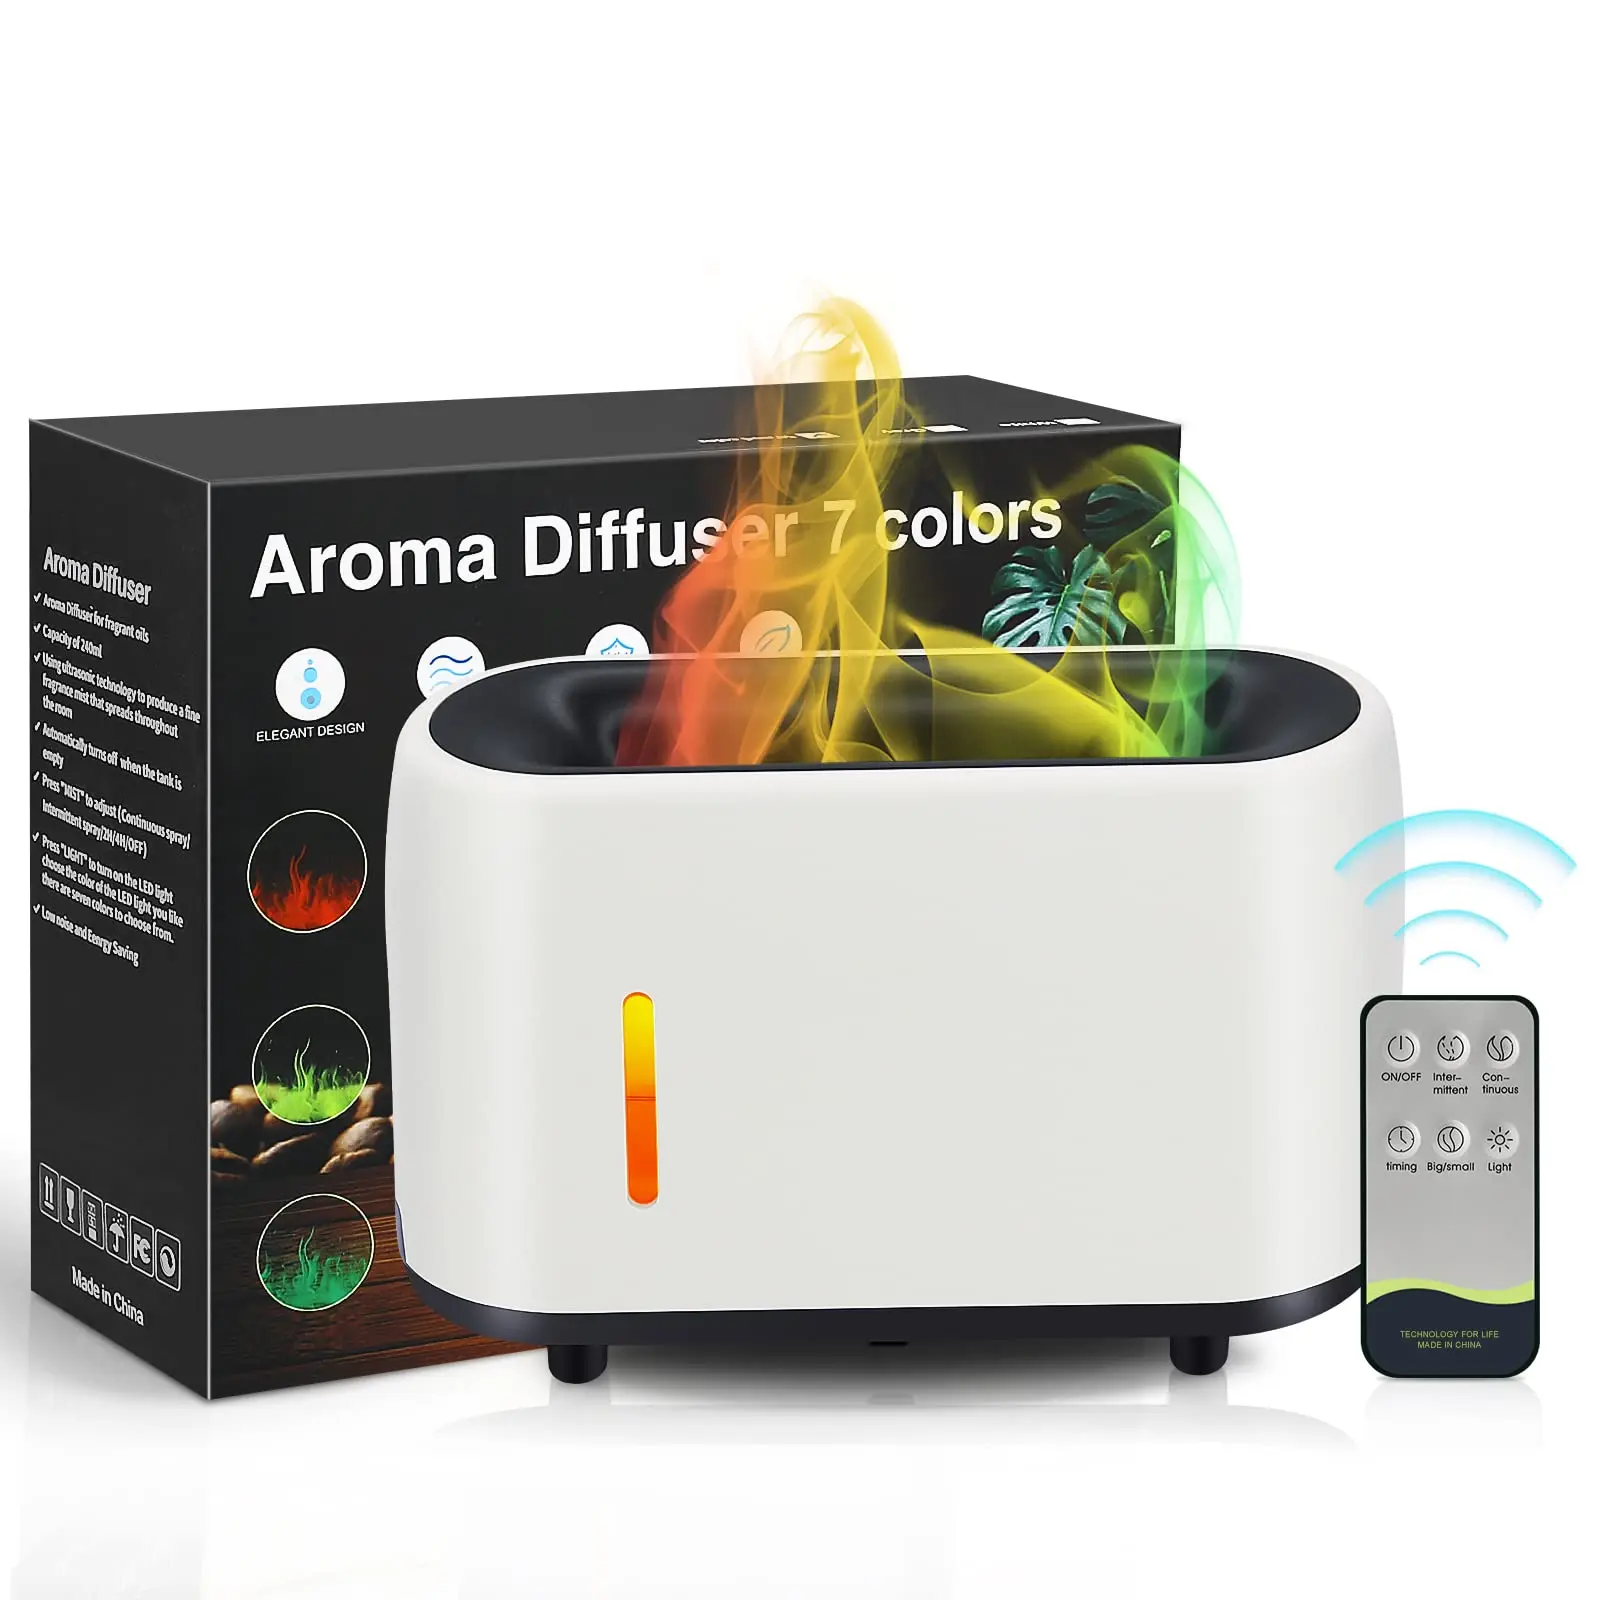 

Flame Aroma Diffuser Air Humidifier 7 Flame Colors,Essential Oil Aroma Therapy Diffuser with Waterless Auto-Off Protection